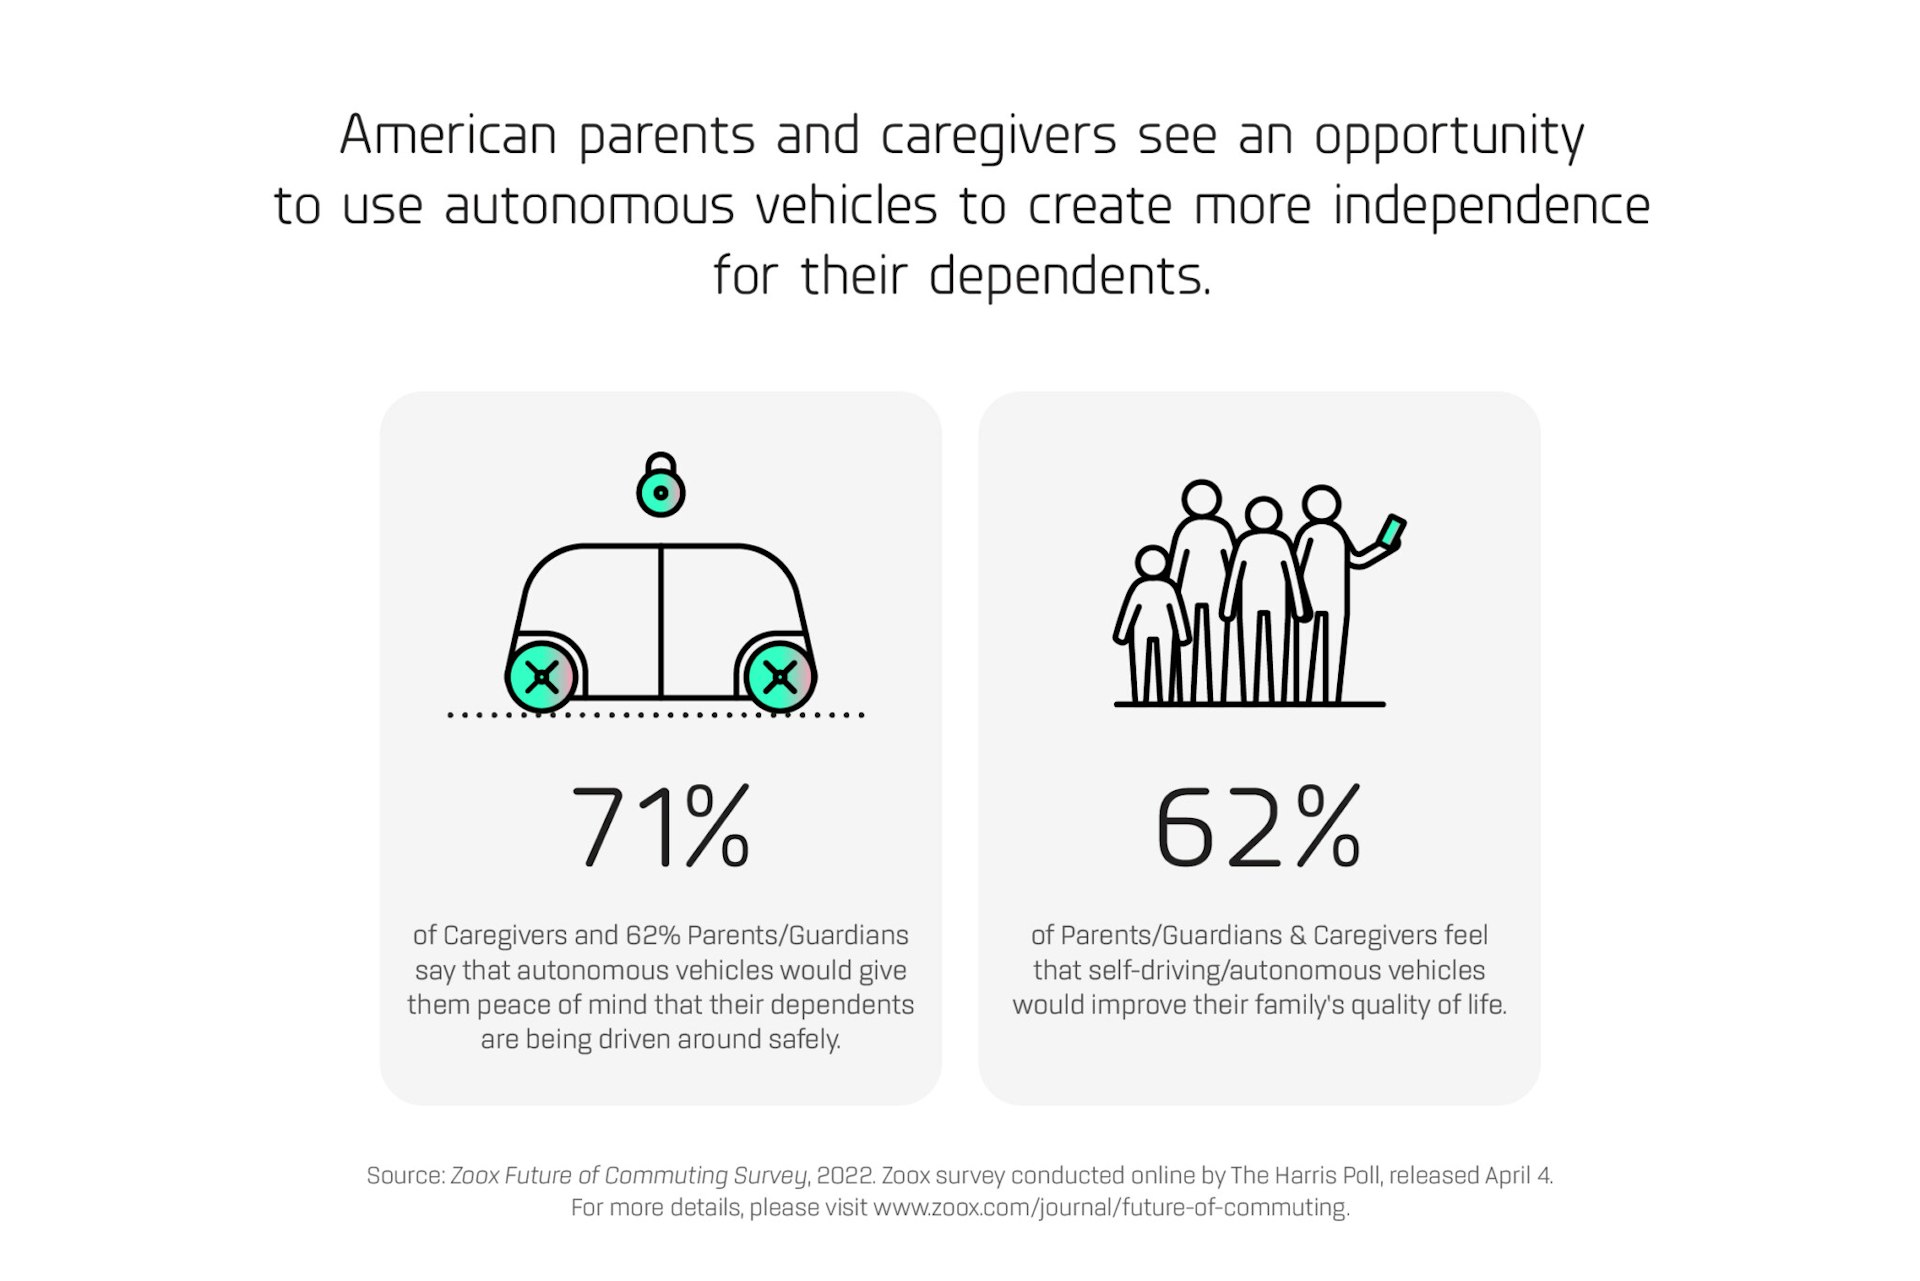 This image is an infographic from a survey about the future of transportation and commuting conducted by autonomous vehicle company, Zoox, and market research firm, the Harris Poll. This infographic shows the results of two questions about how caregivers and families may benefit from autonomous vehicles. The infographic includes two columns that each have an illustration at the top of the column, a percentage in the middle of the column, and a written description at the bottom of the column. At the bottom of the infographic there are directions to visit www.zoox.com/journal/future-of-commuting for more information. The first column has an illustration of a Zoox autonomous vehicle, which is drawn as a rectangle with rounded edges with a wheel on both the right and left bottom corners. Above the vehicle is a drawing of a padlock. It includes the stat: 71% of Caregivers and 62% of Parents/Guardians say that autonomous vehicles would give them peace of mind that their dependents are being driven around safely. The second column has an illustration of the outline of a faceless human family of four. The family member on the right is looking at a cell phone. It includes the stat: 62% of Parents/Guardians and Caregivers feel that self-driving/autonomous vehicles would improve their family’s quality of life.